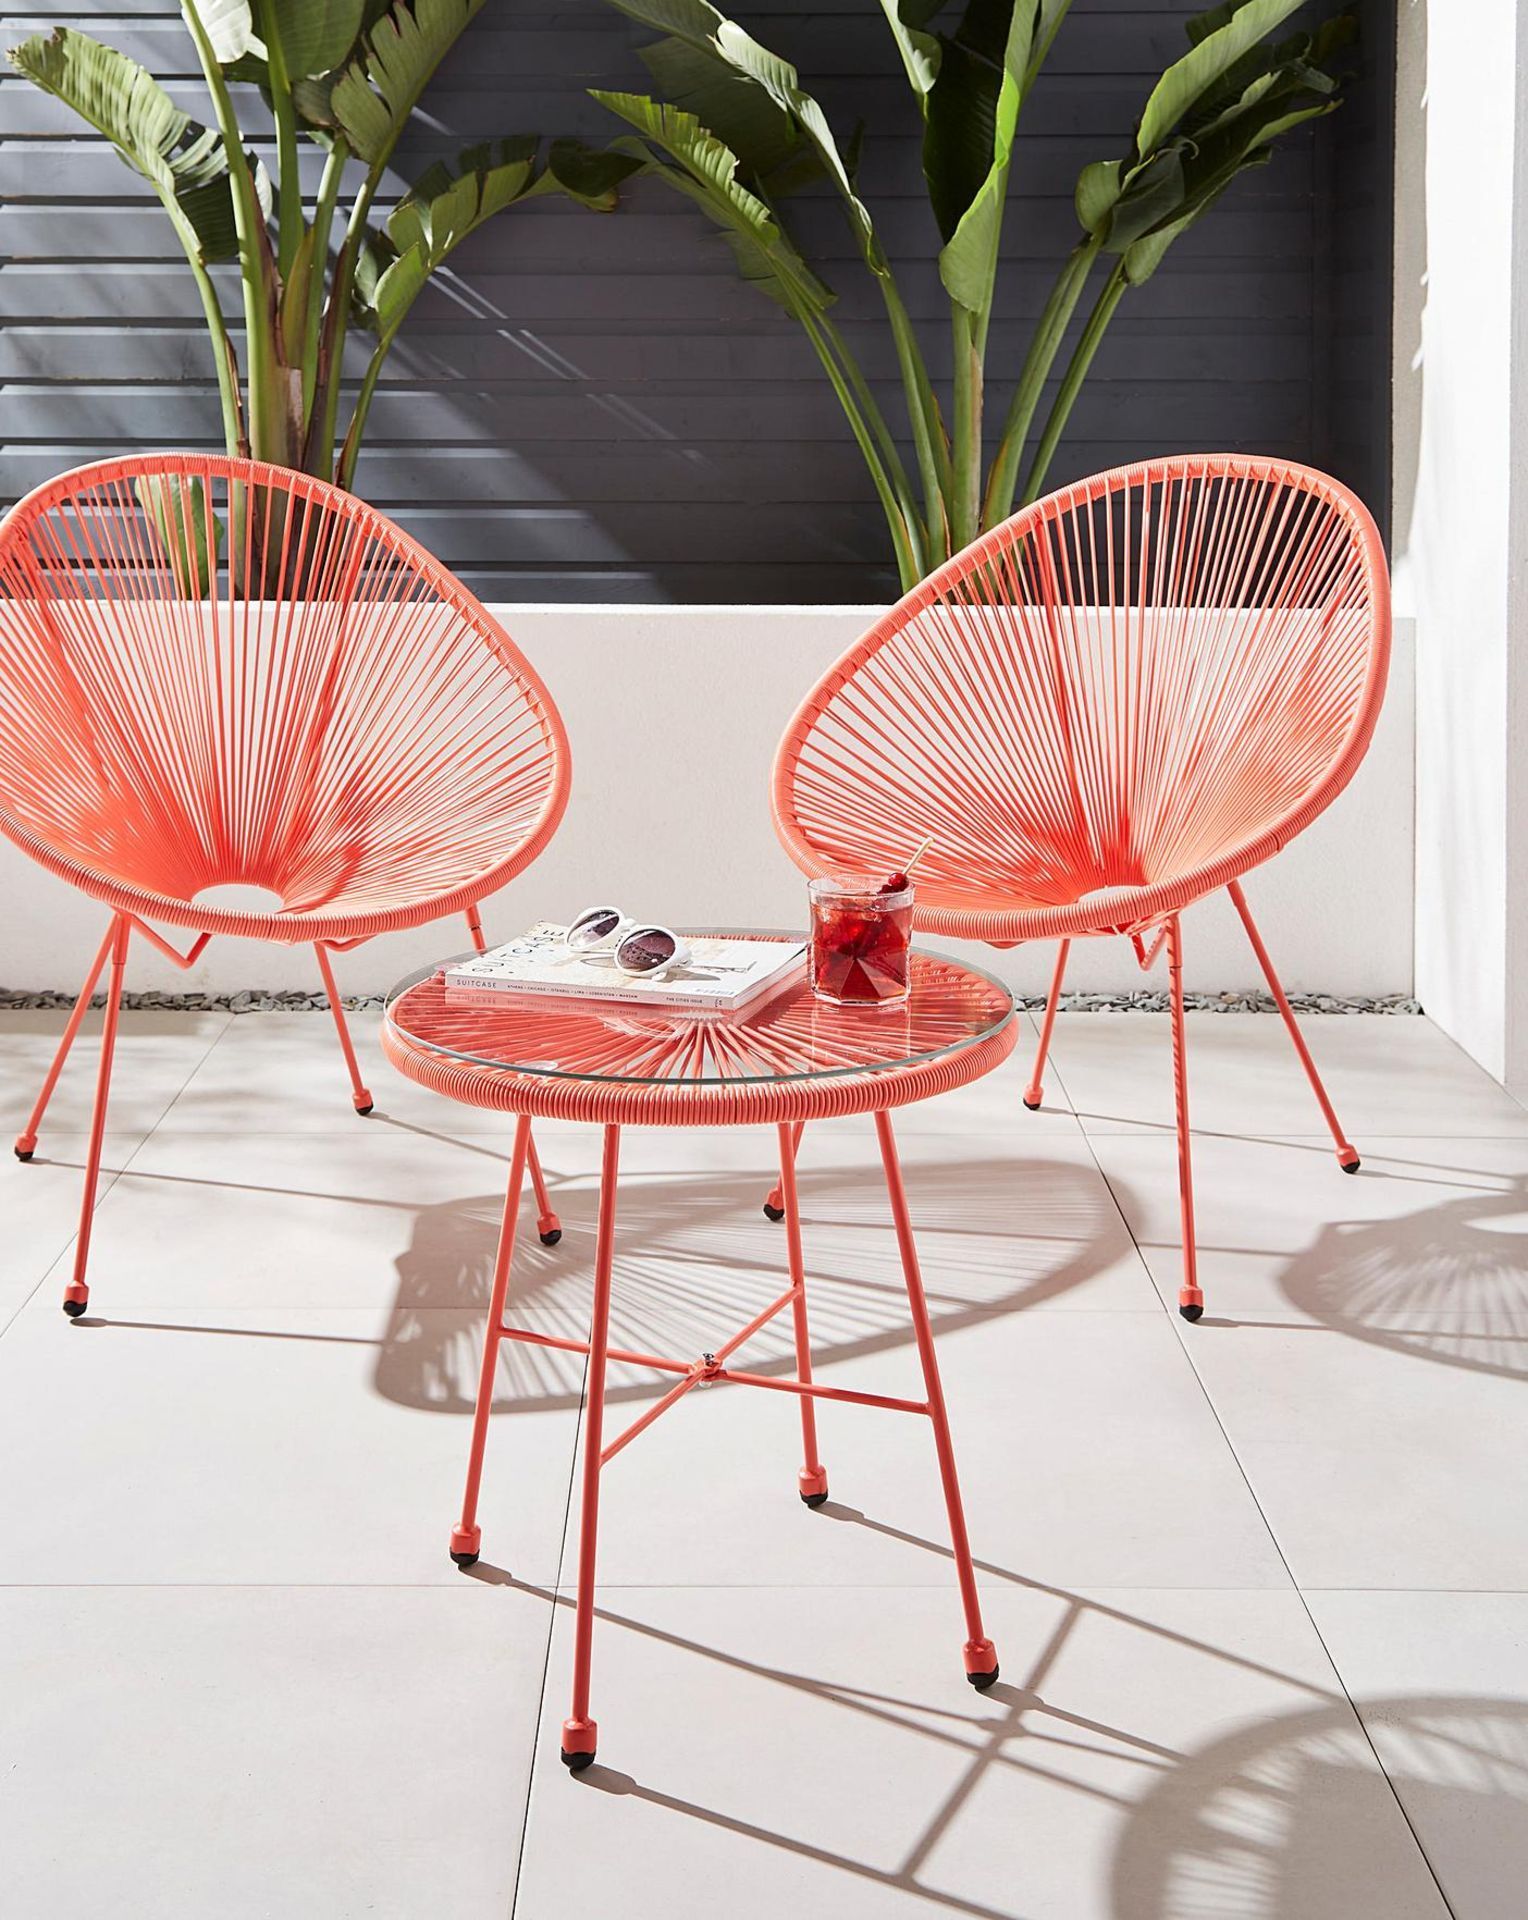 TRADE LOT 4 x New & Boxed Salsa Bistro Lounge Set (CORAL). RRP £349.99 each. The Salsa Bistro Lounge